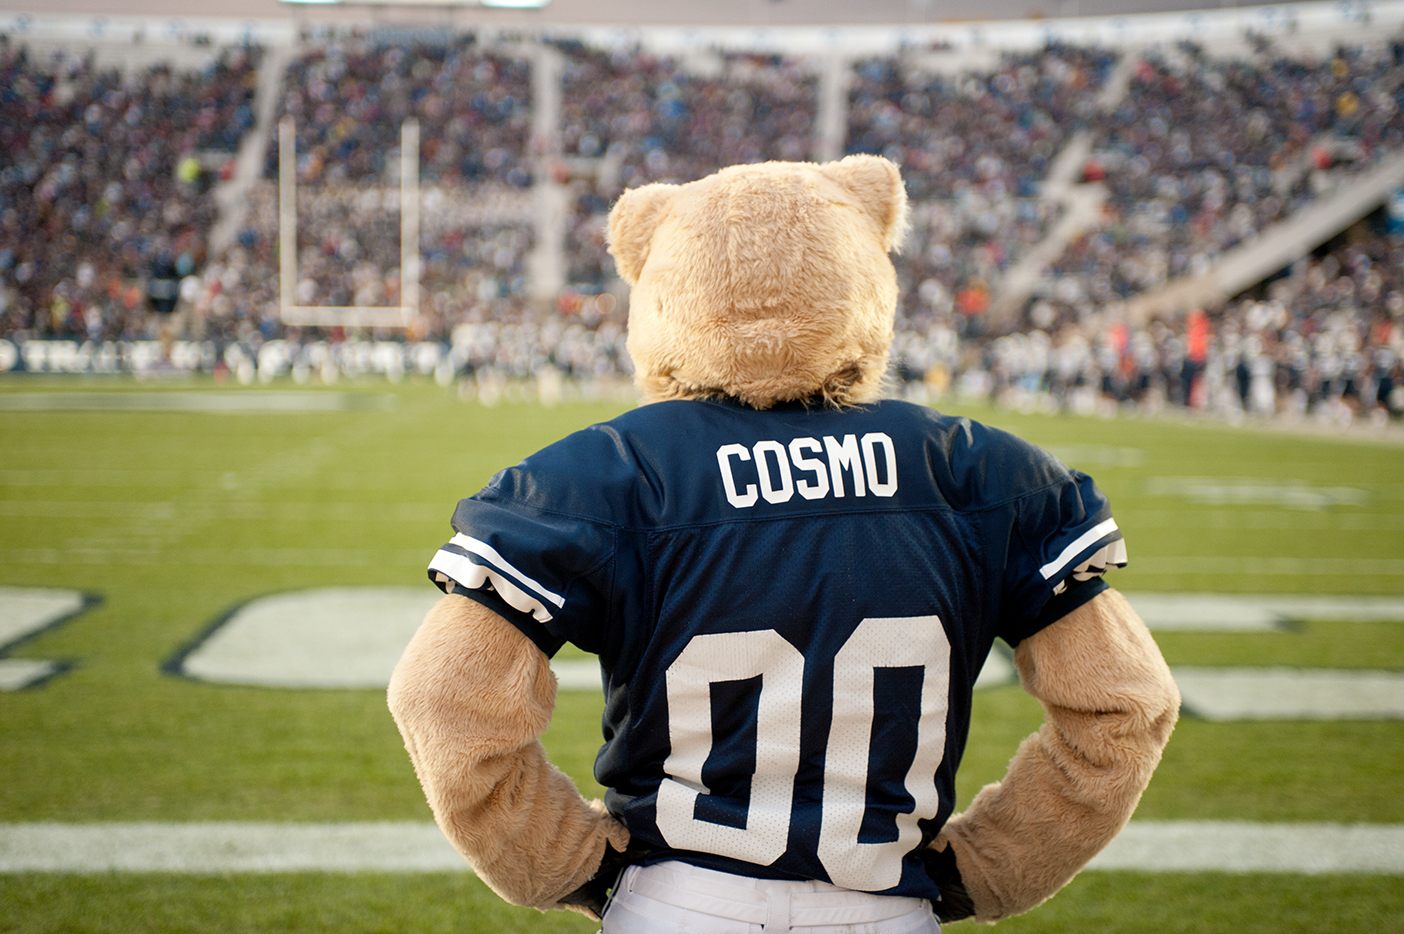 Cosmo watches a football game from the sidelines.